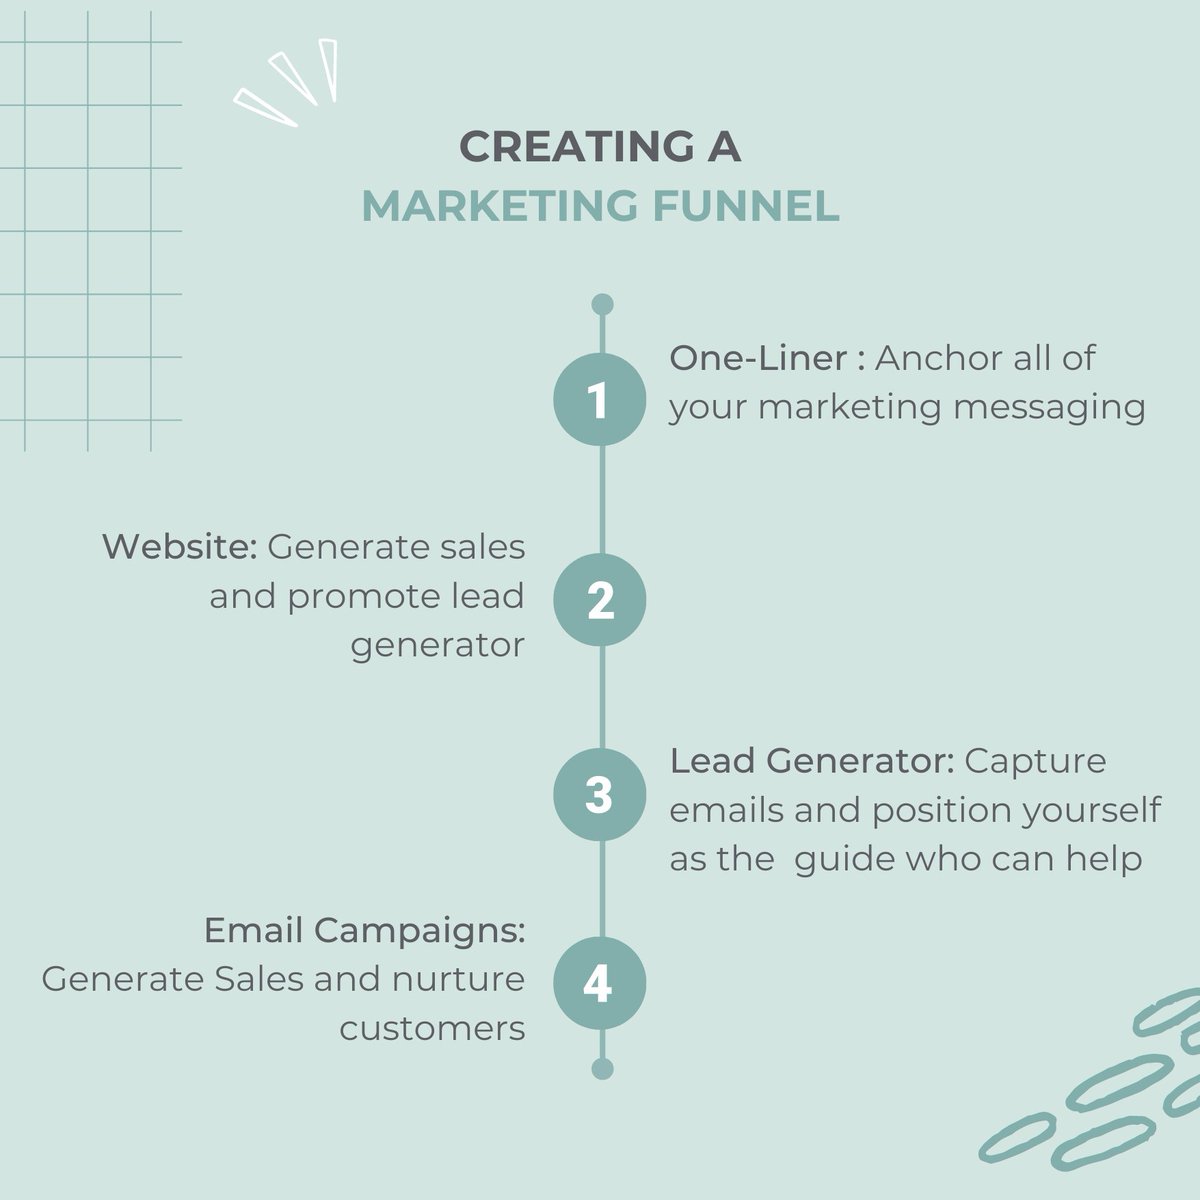 Guide your audience from curiosity to conversion with a powerful marketing funnel. 🎯📈

#MarketingFunnel #ConversionFunnel #FunnelStrategy #AudienceJourney #CustomerConversion #SalesFunnel #MarketingTips